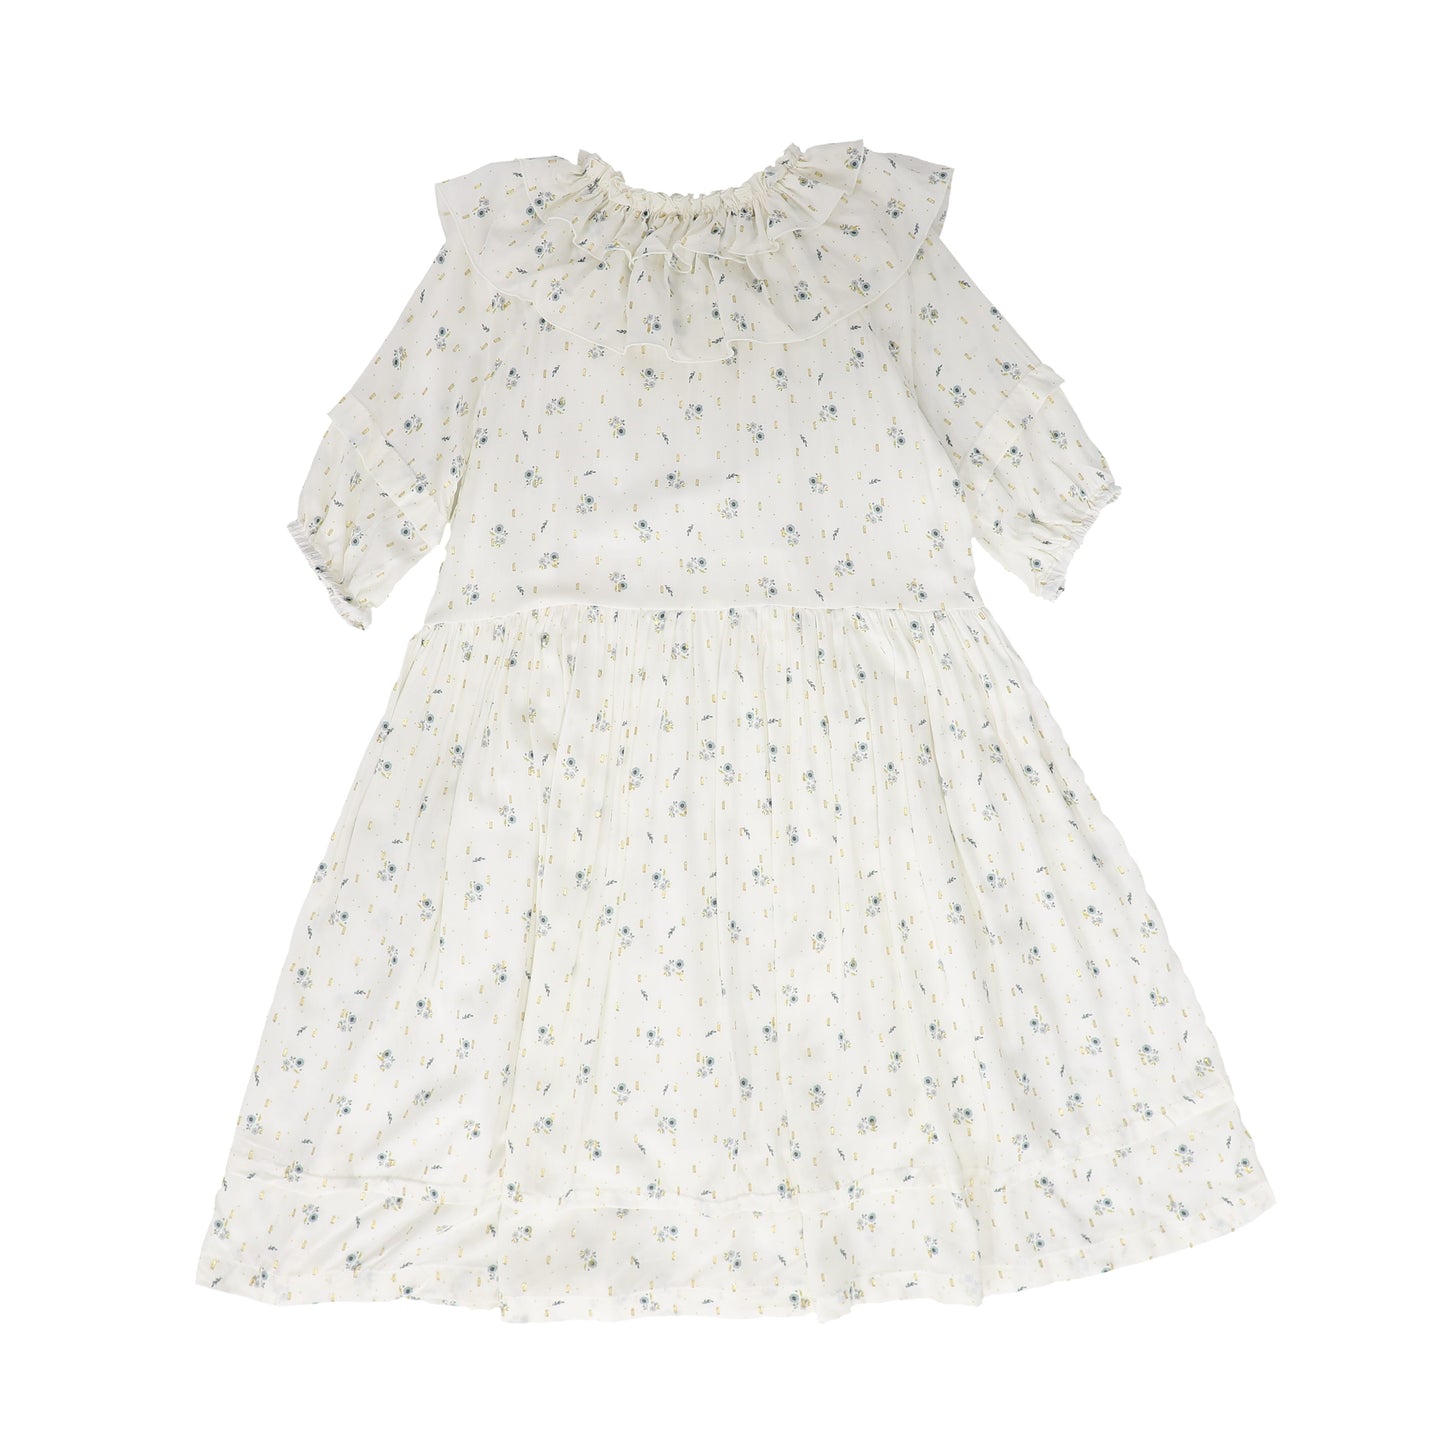 COSMOSOPHIE WHITE / BLUE FLORAL PRINTED RUFFLE COLLAR DRESS [FINAL SALE]